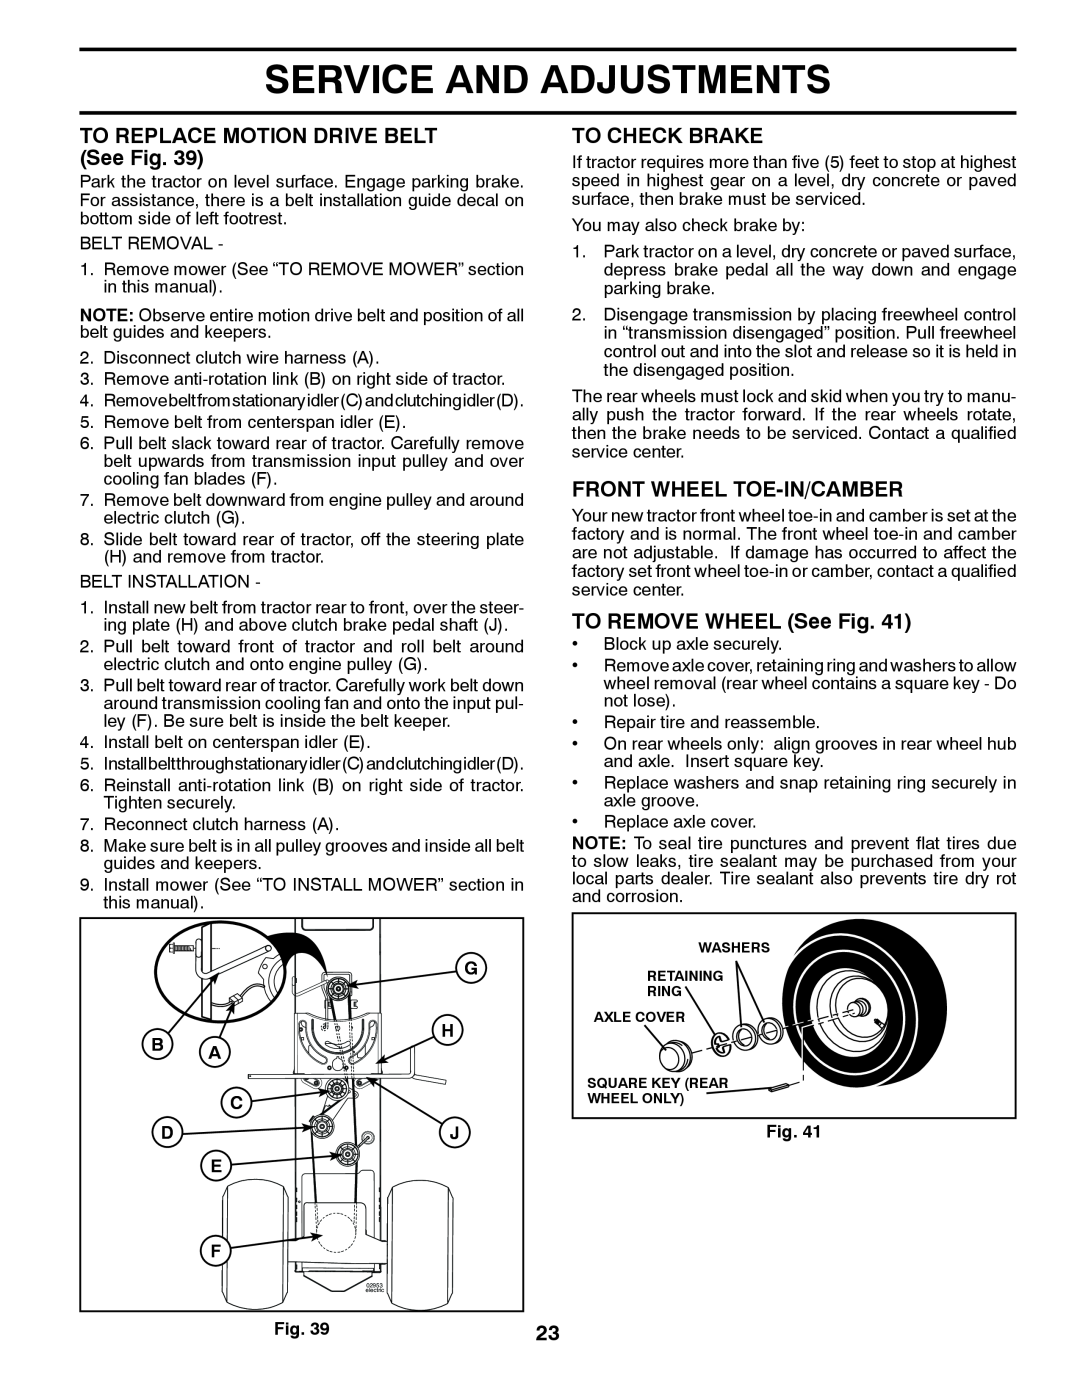 Poulan 96042011001, 532 43 34-32 manual TO REPLACE MOTION DRIVE BELT See Fig, To Check Brake, Front Wheel Toe-In/Camber 